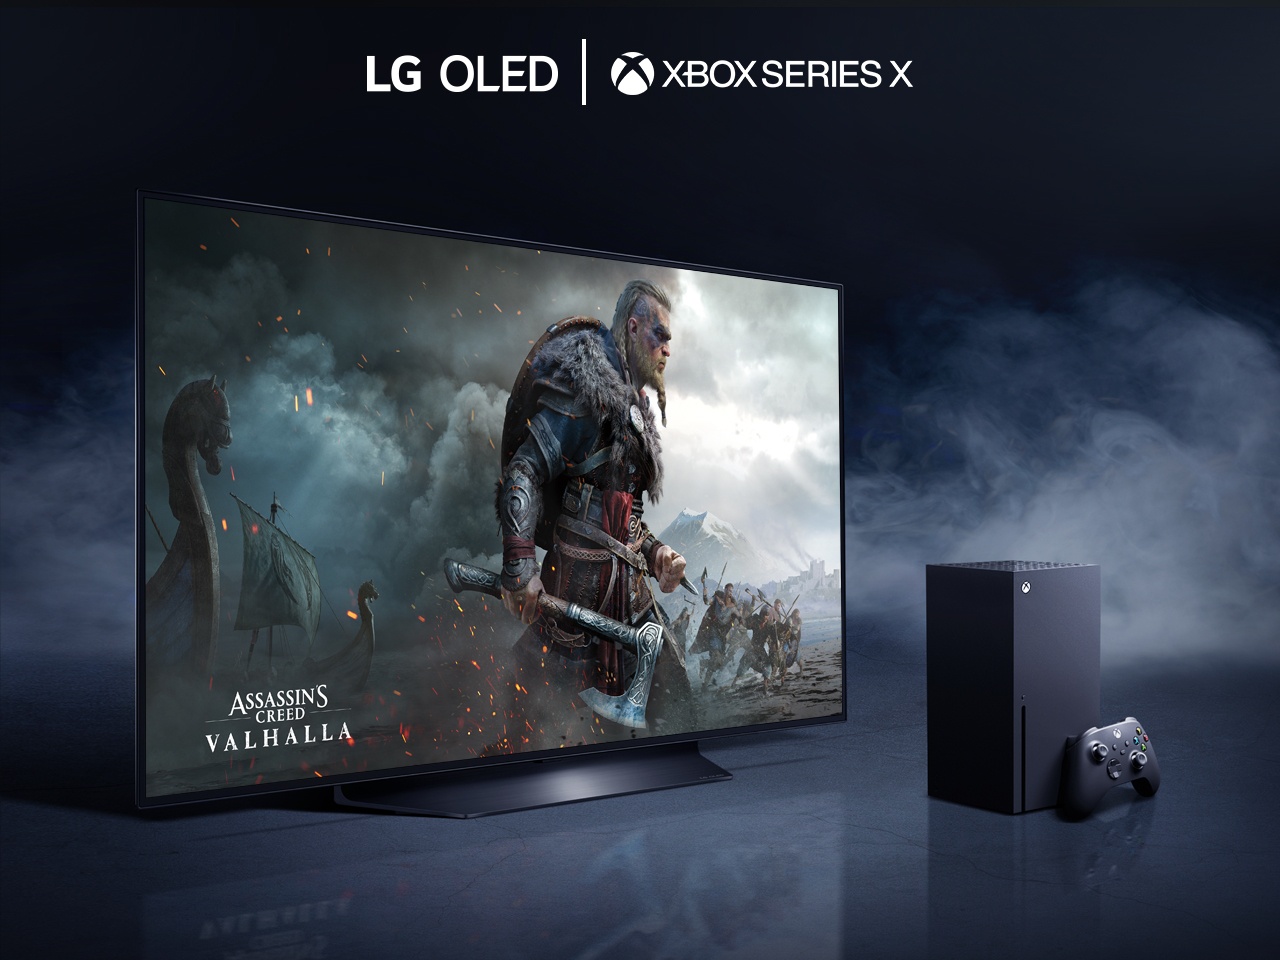 LG oled tv and XBox series x unleash  Next-gen console gaming experience